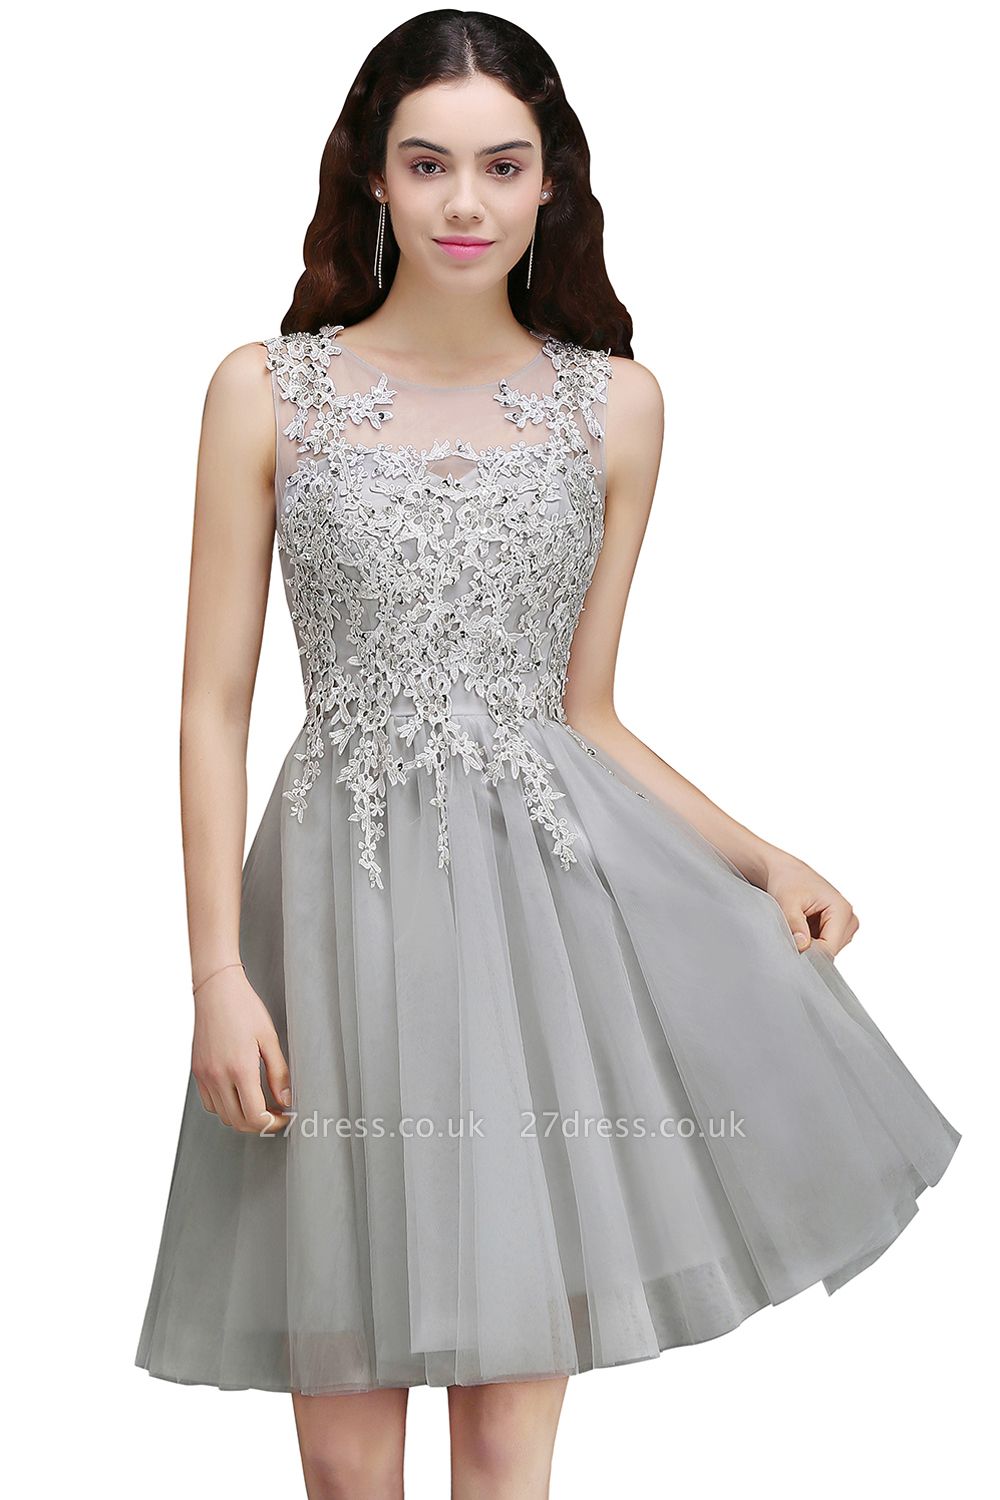 Silver Tulle Short A-Line Sleeveless Appliques Homecoming Dress UK